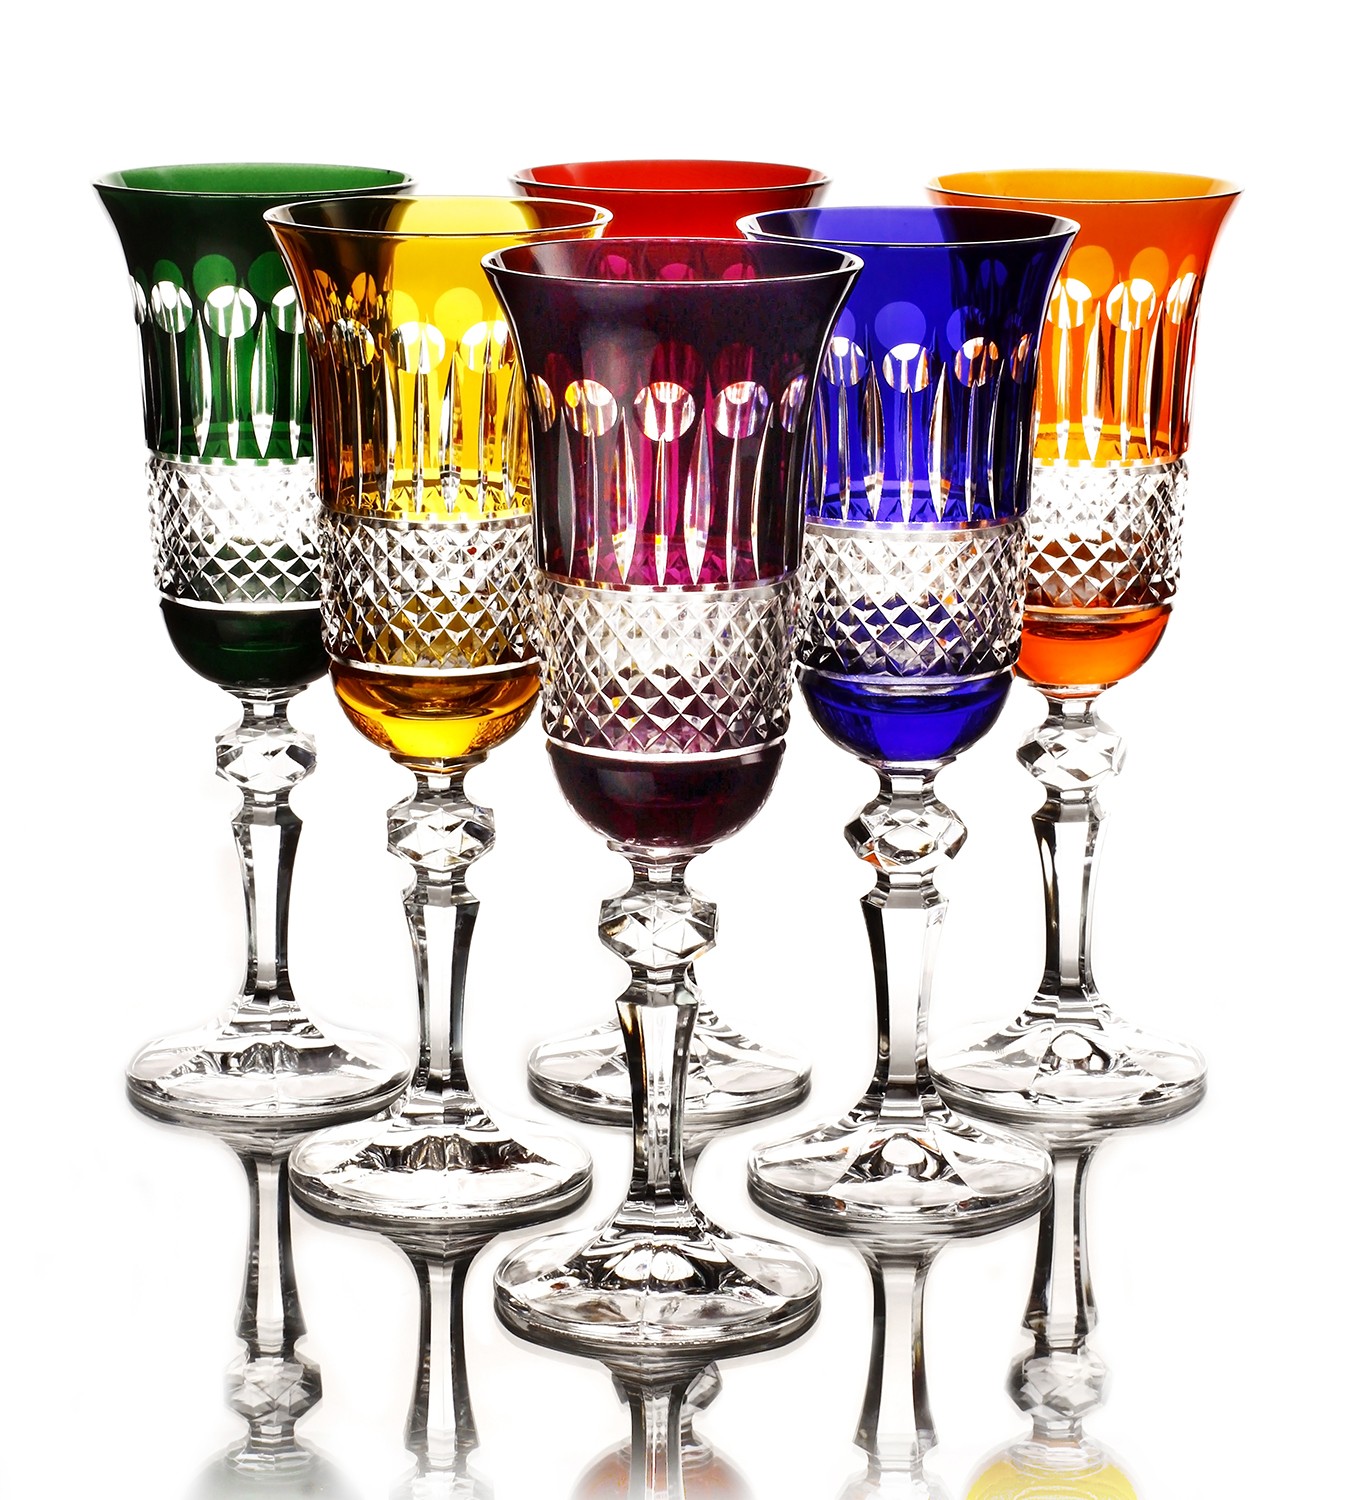 Emperor Multicoloured Crystal Champagne Glasses Set Of 6 Champagne Glasses Product Categories